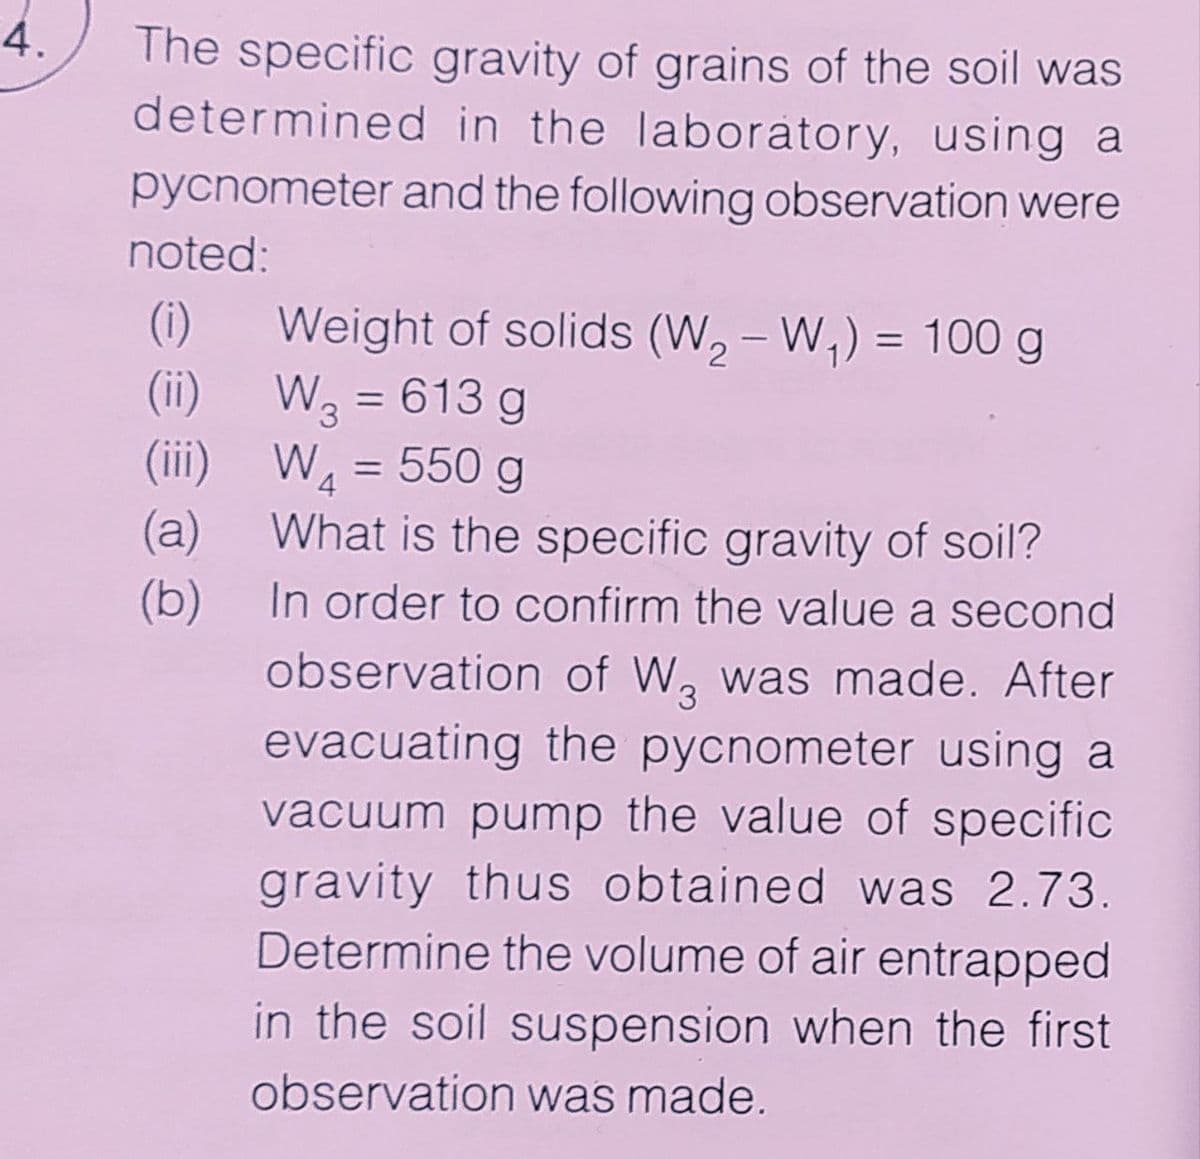 4.
The specific gravity of grains of the soil was
determined in the laboratory, using a
pycnometer and the following observation were
noted:
(i)
Weight of solids (W, - W,) = 100 g
%3D
(ii)
W3 = 613 g
(ii)
W = 550 g
(a)
What is the specific gravity of soil?
(b) In order to confirm the value a second
observation of W, was made. After
evacuating the pycnometer using a
vacuum pump the value of specific
gravity thus obtained was 2.73.
Determine the volume of air entrapped
in the soil suspension when the first
observation was made.
